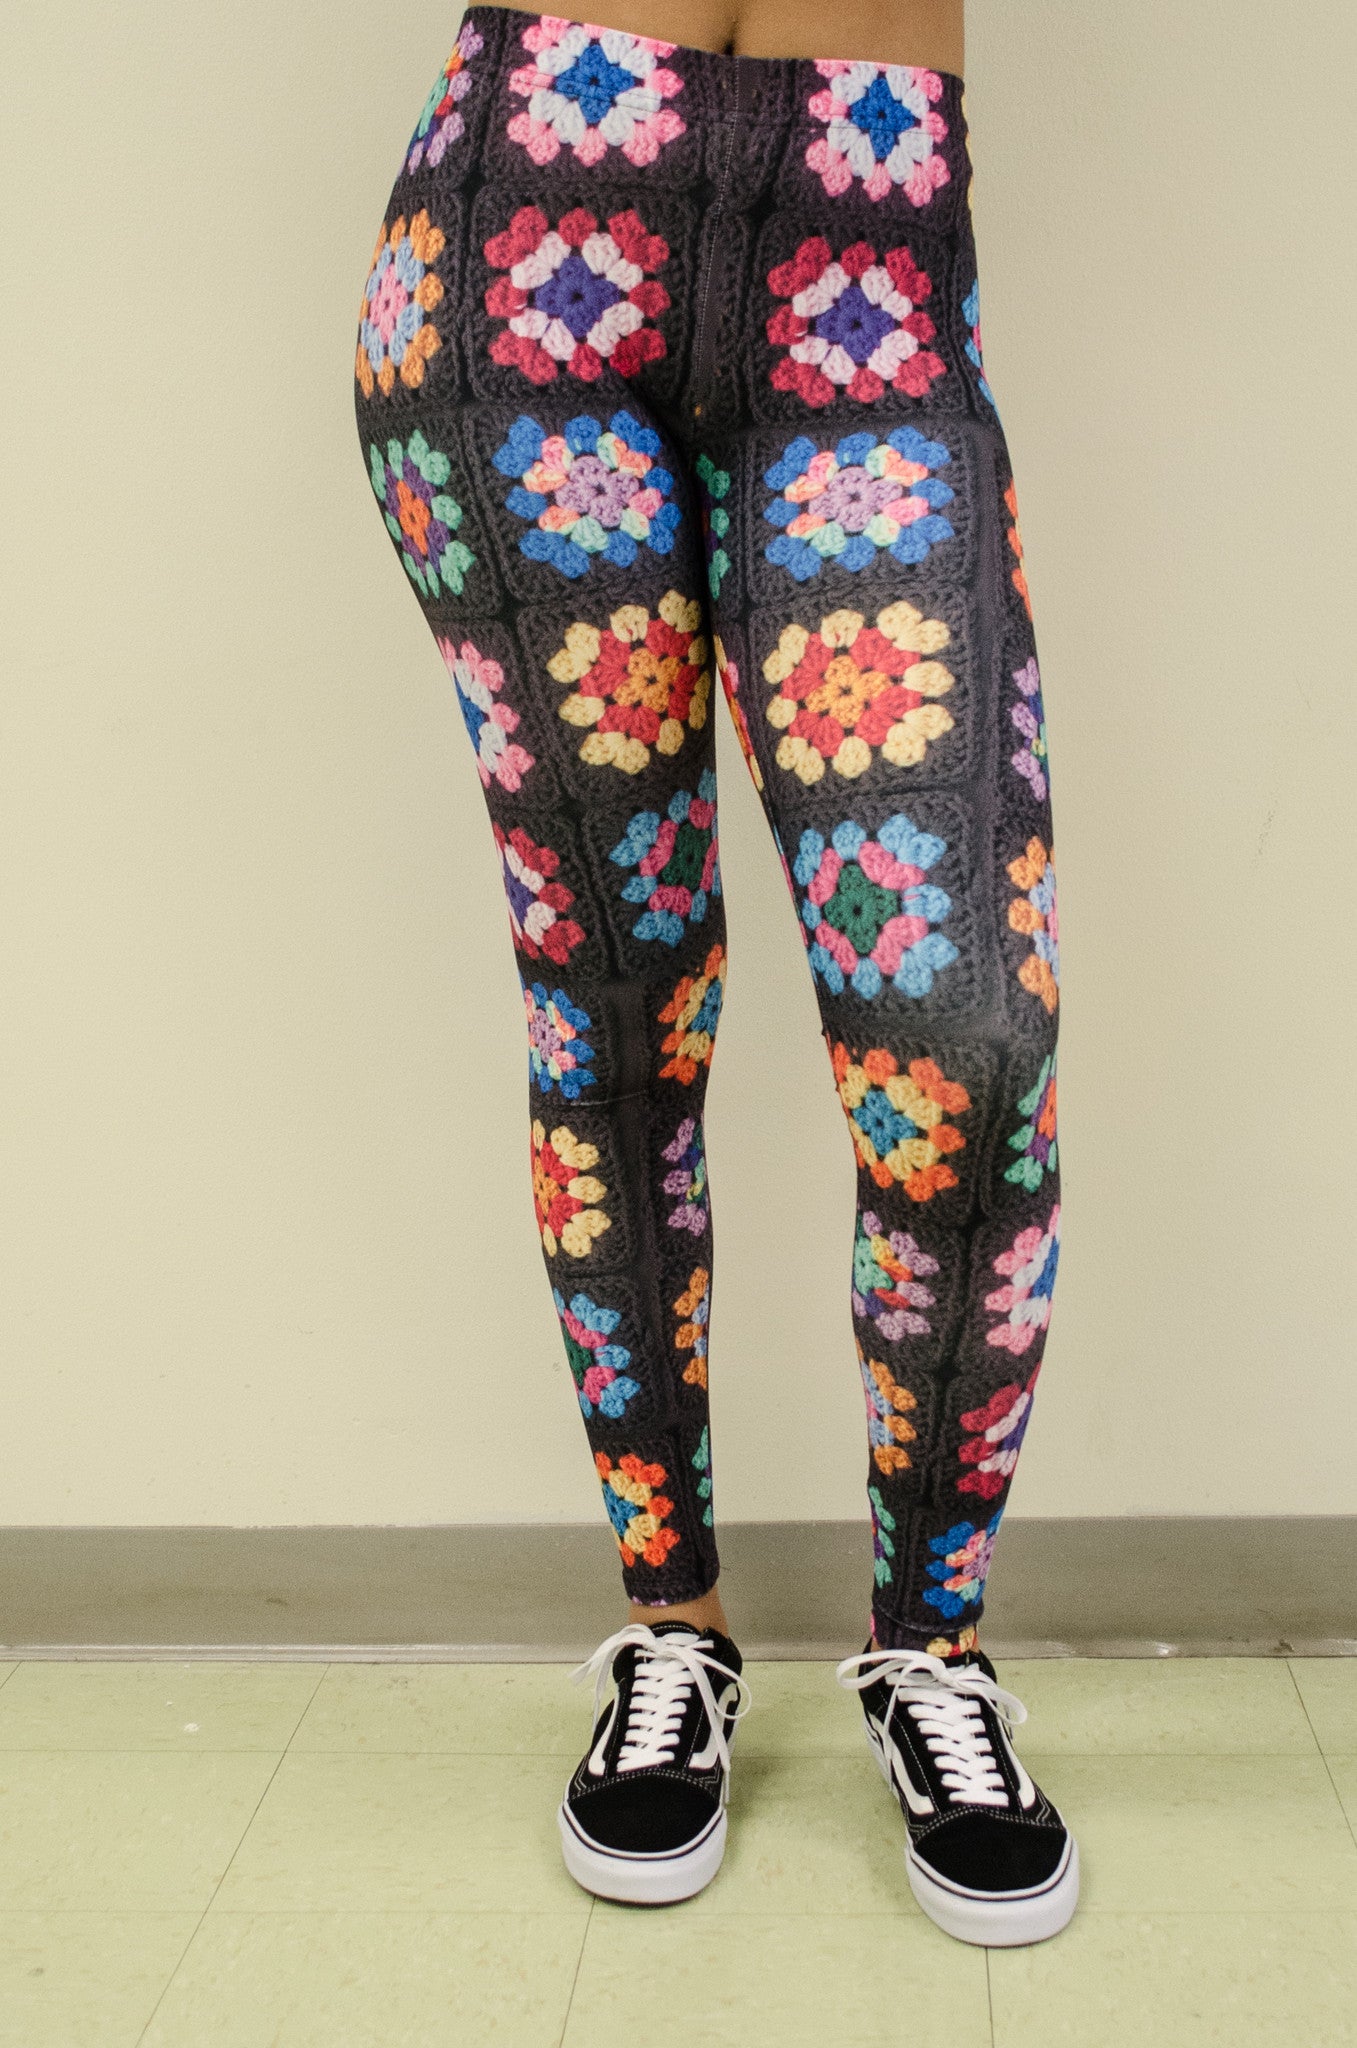 Snapdragon Brand Clothing Granny Square Crochet Print black leggings in style Kaleidoscope features a 1960s vintage boho feel and a rainbow of colors. Made of comfortable spandex.